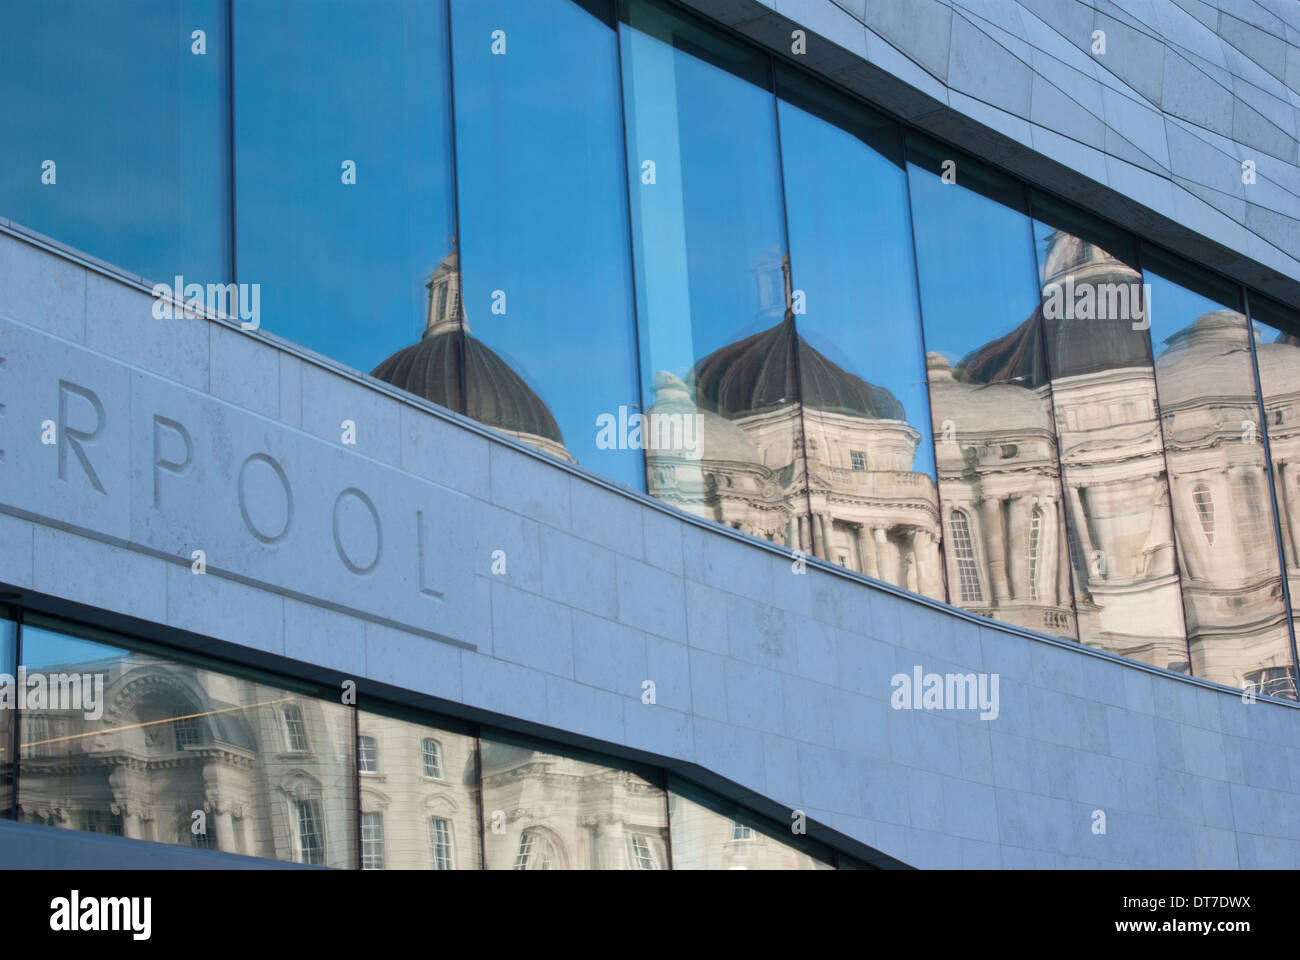 Reflections in the windows of the Museum of Liverpool Stock Photo